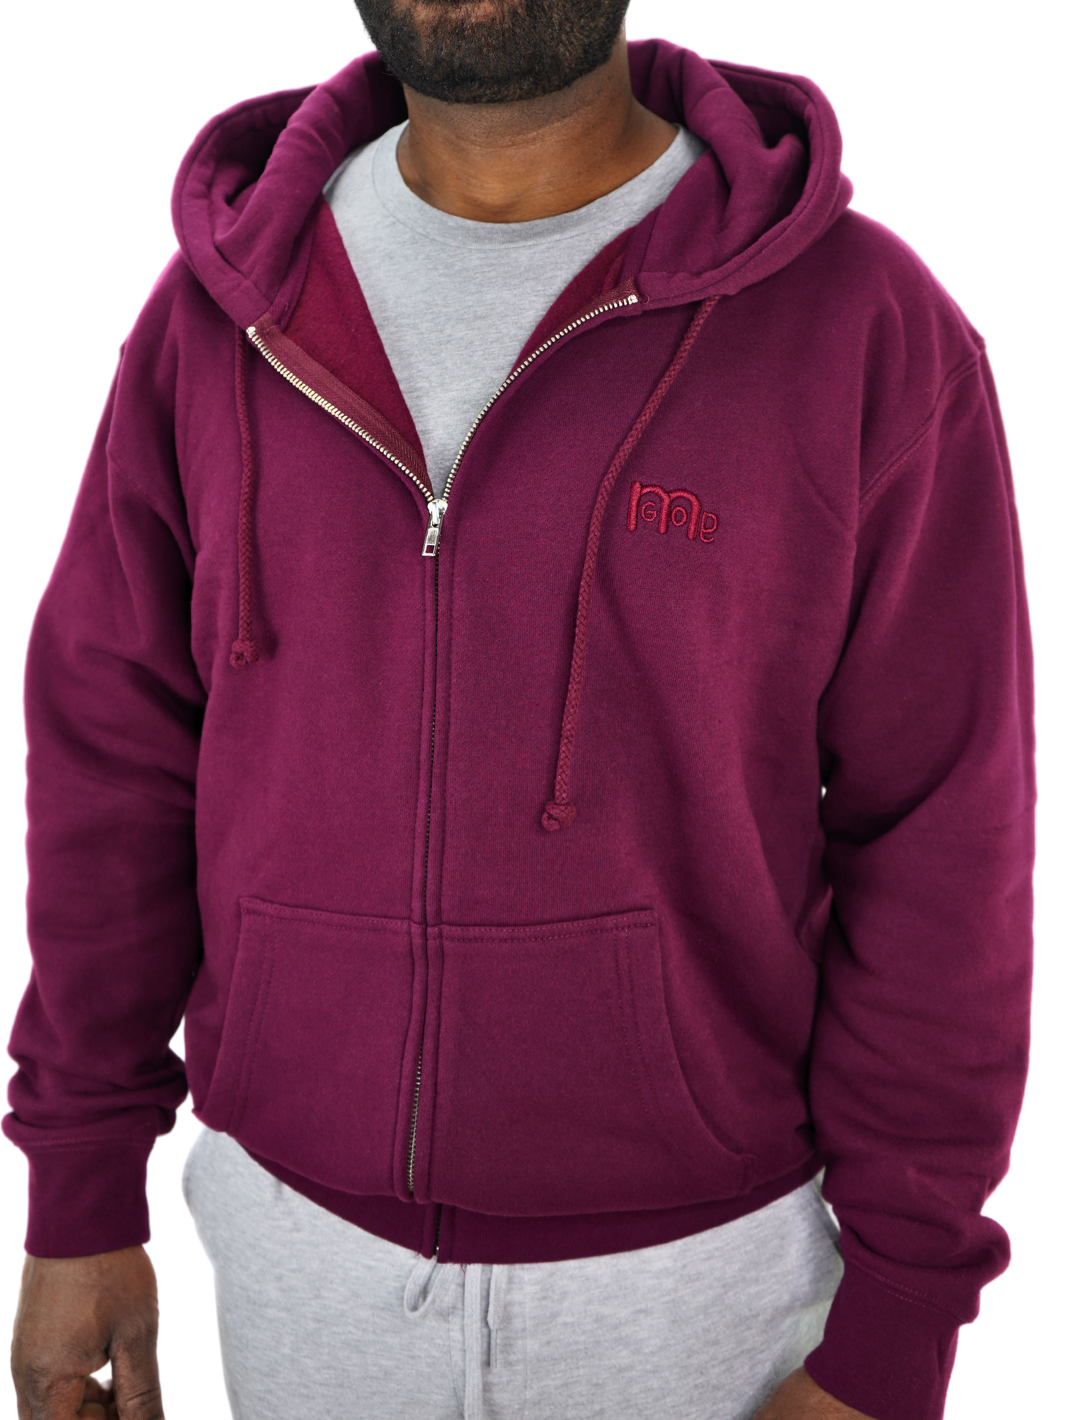 Maroon Full Zip Hoodie with tone on tone embroidered GODinme logo at left chest